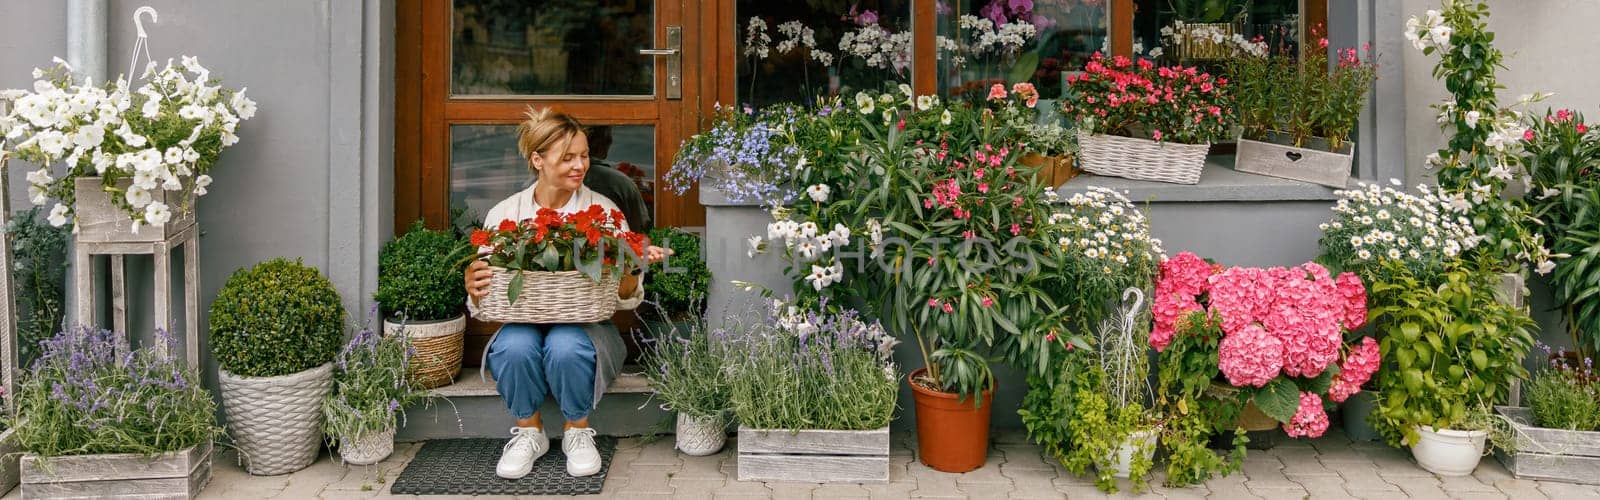 Woman florist small business owner sitting in floral store and waiting for client with houseplants